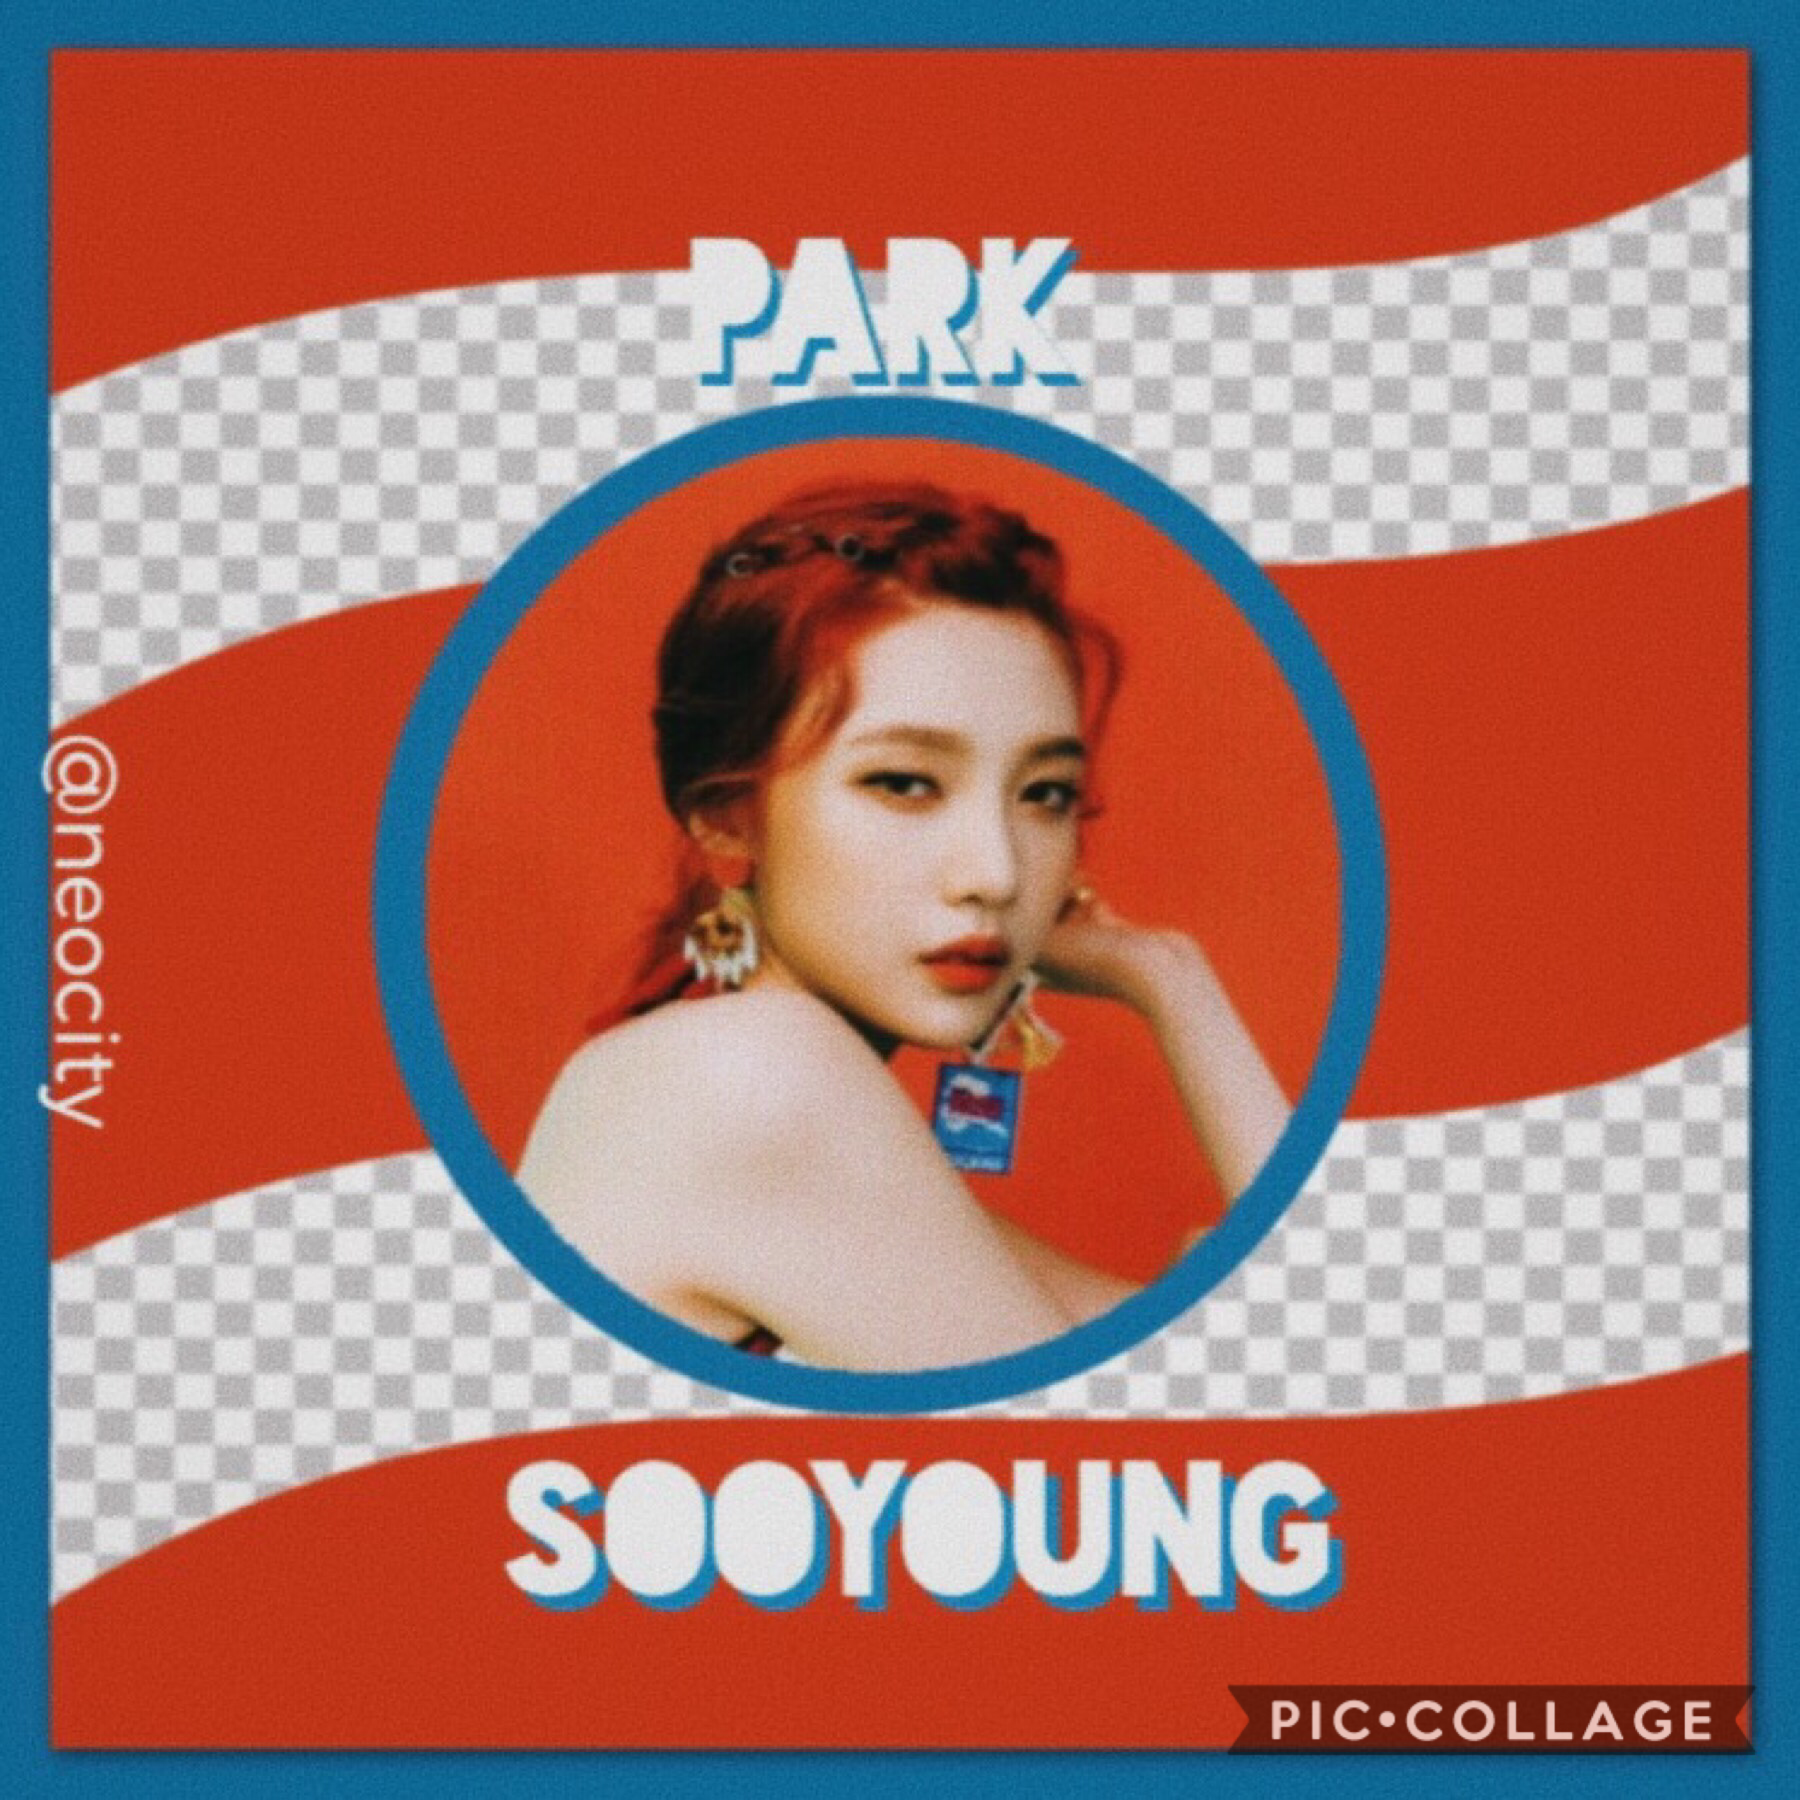 ❤️💙 used piccollage, picsart, phonto and vsco for this one :)) what do you think?
(requests are open!)
and i noticed that some people r posting these “meet the editor”...should i post one too?